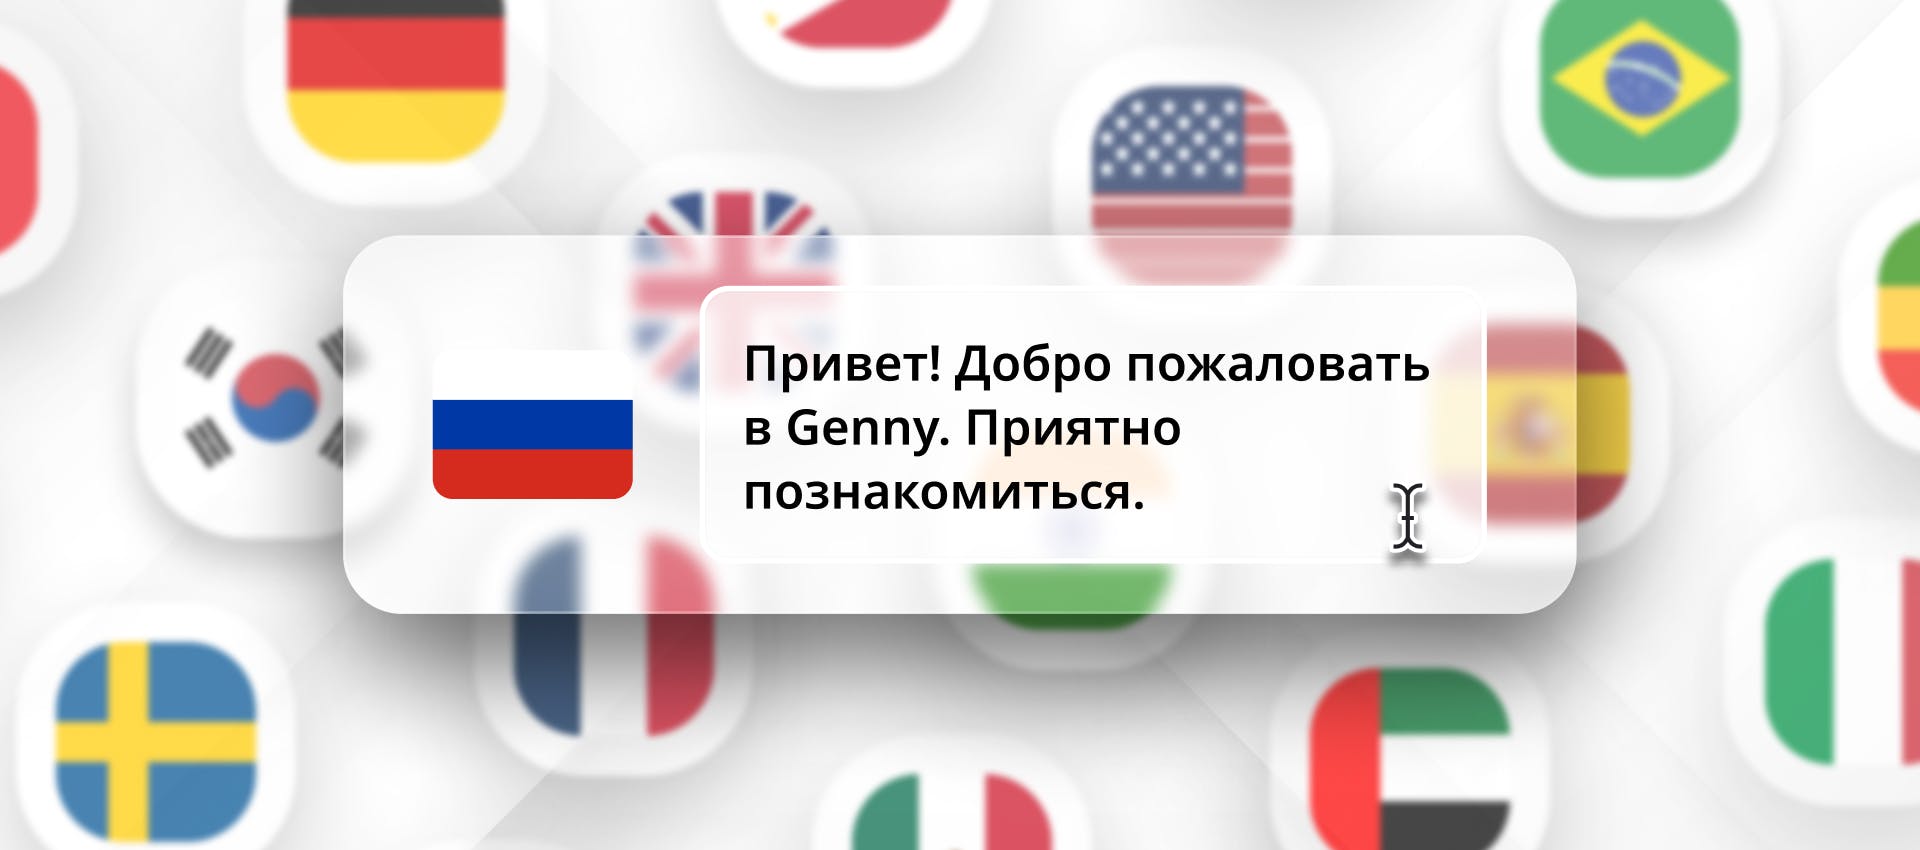 Russian phrase for TTS generation with different flags in the background